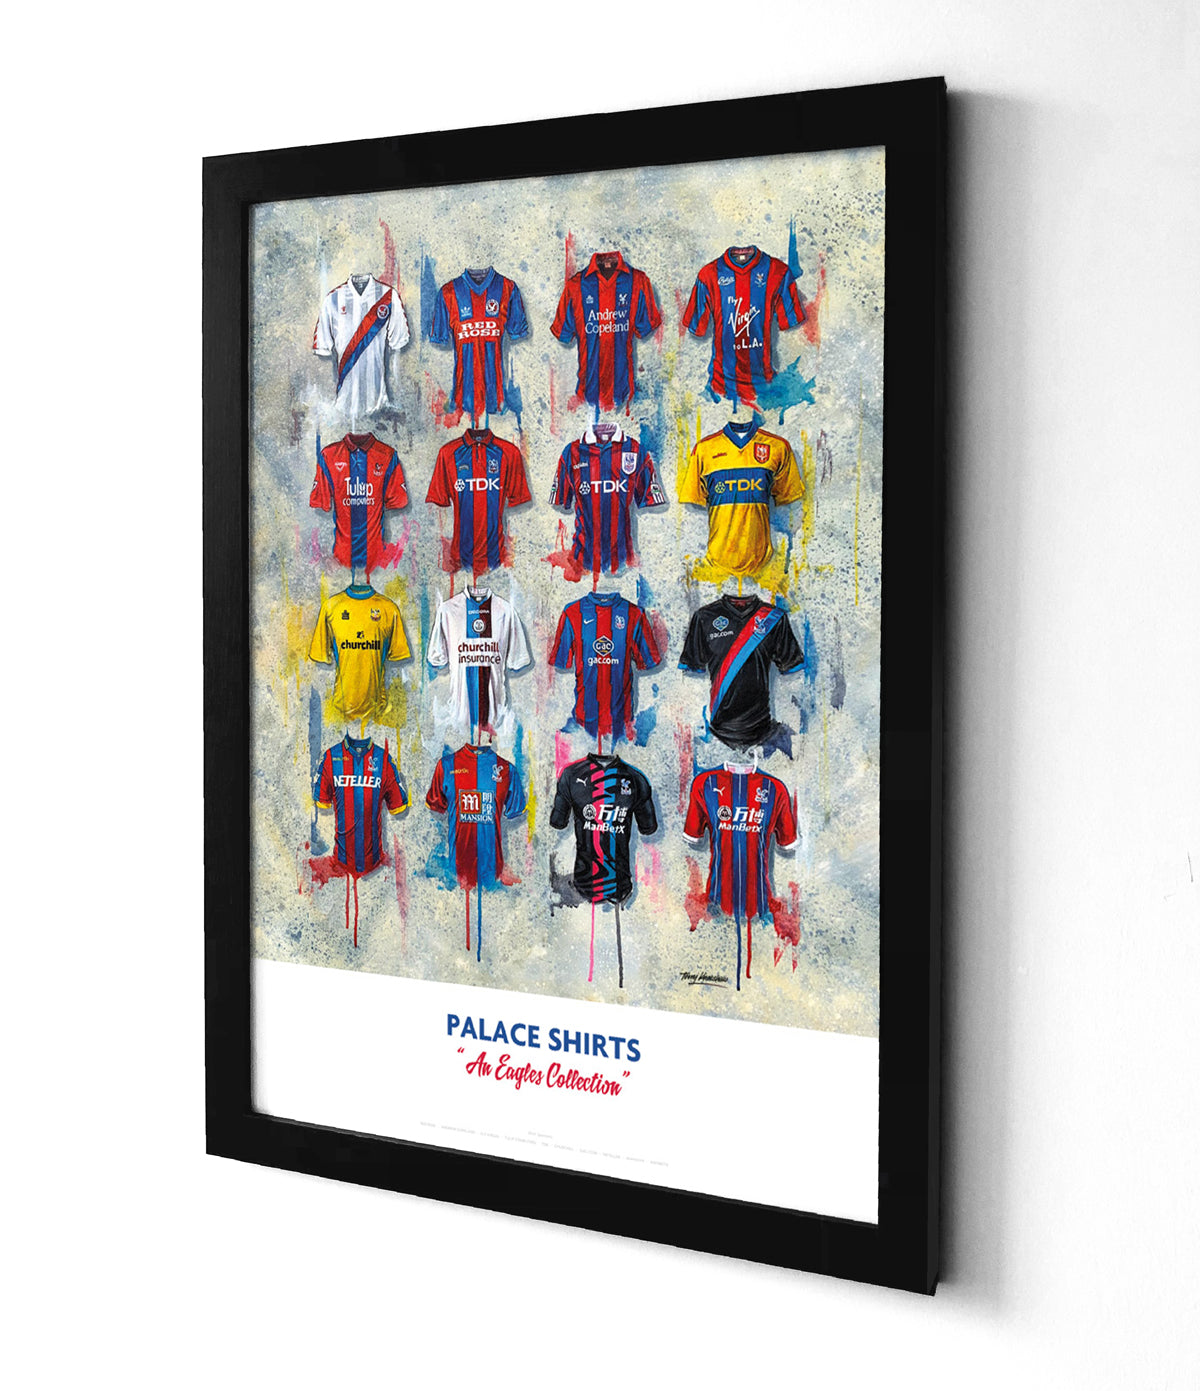 This limited edition A2 print by Terry Kneeshaw features 16 iconic Crystal Palace jerseys, customized to include a personal name and number. The artwork showcases the club's most memorable kits from its rich history, including the iconic sash jersey worn in the 1970s and the bold blue and red stripes of the 1990s. Each jersey is meticulously recreated in stunning detail, making this print the perfect addition to any Palace fan's collection.